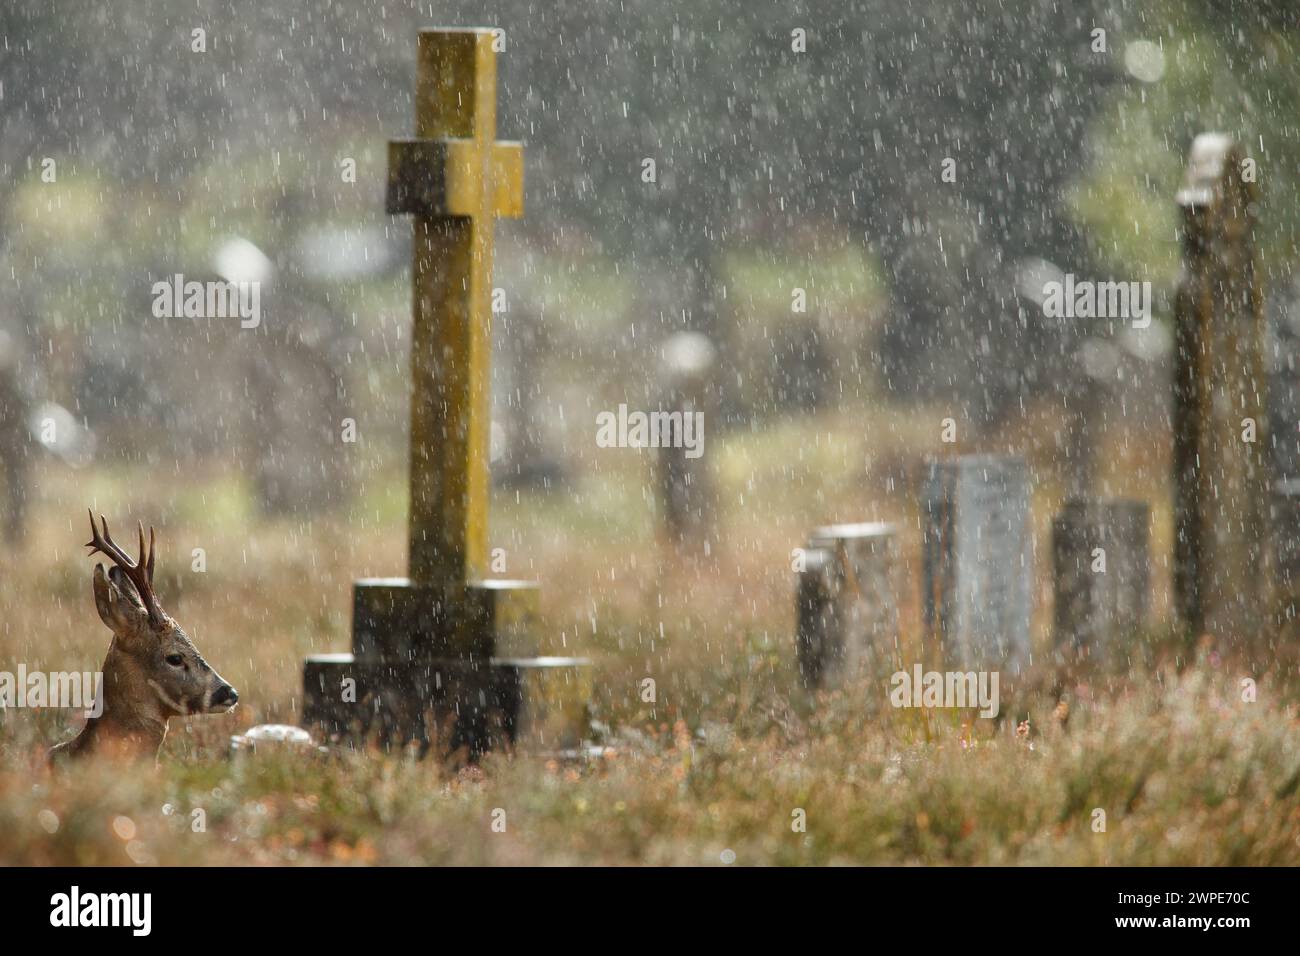 Roe buck resting in a cemetery during a heavy downpour Stock Photo